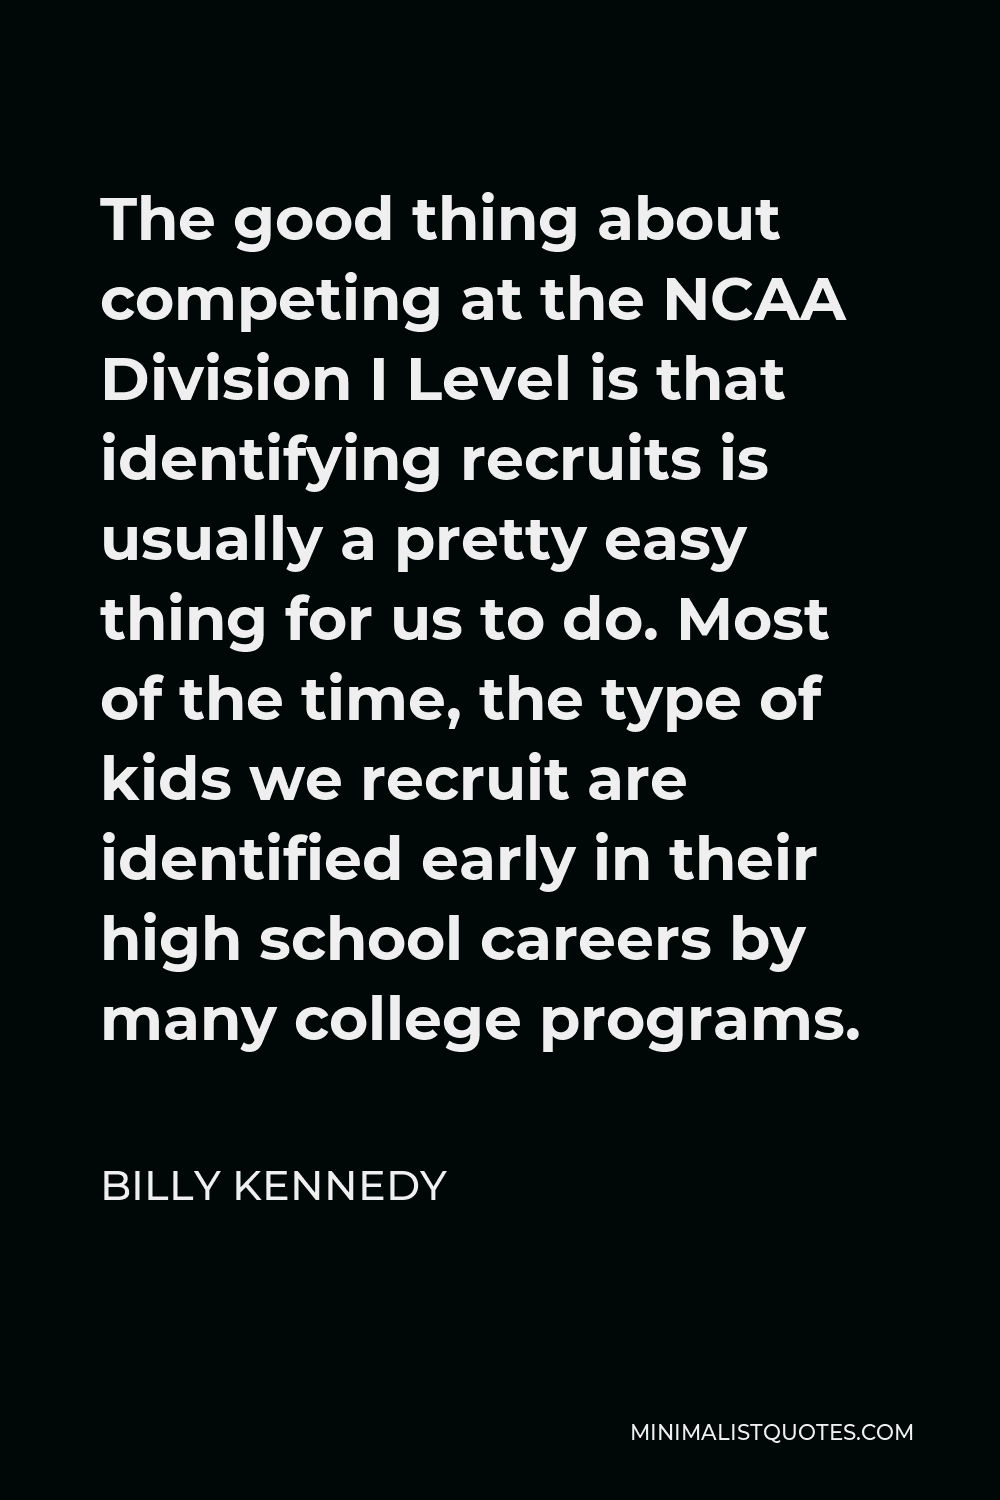 Billy Kennedy Quote - The good thing about competing at the NCAA Division I Level is that identifying recruits is usually a pretty easy thing for us to do. Most of the time, the type of kids we recruit are identified early in their high school careers by many college programs.